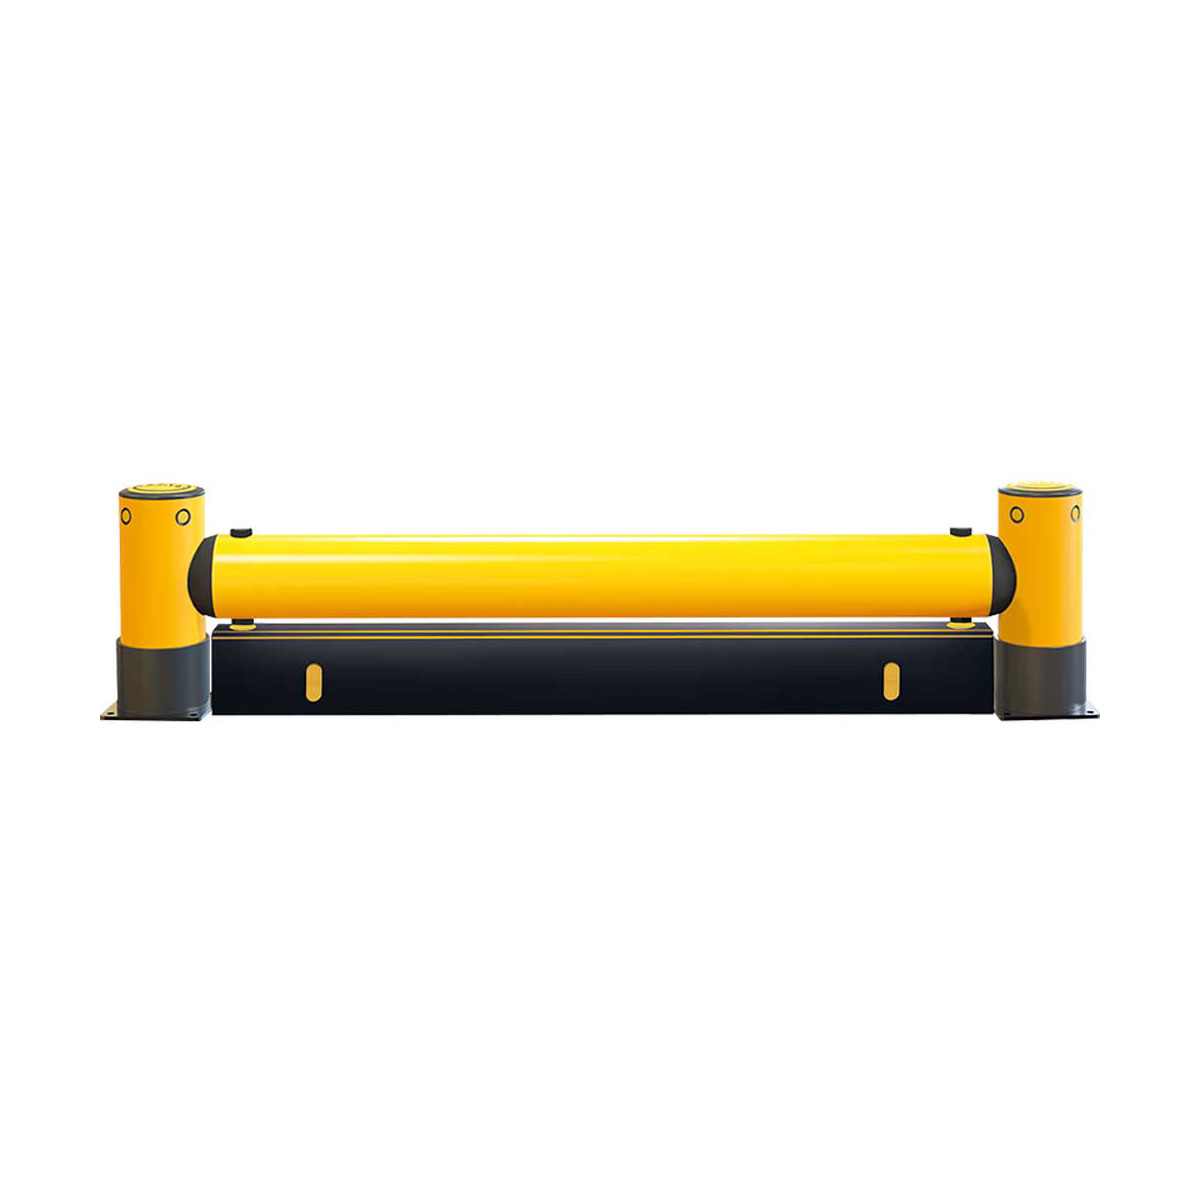 Buy Rack-end Barrier - A-Safe (Flexible Plastic) available at Astrolift NZ